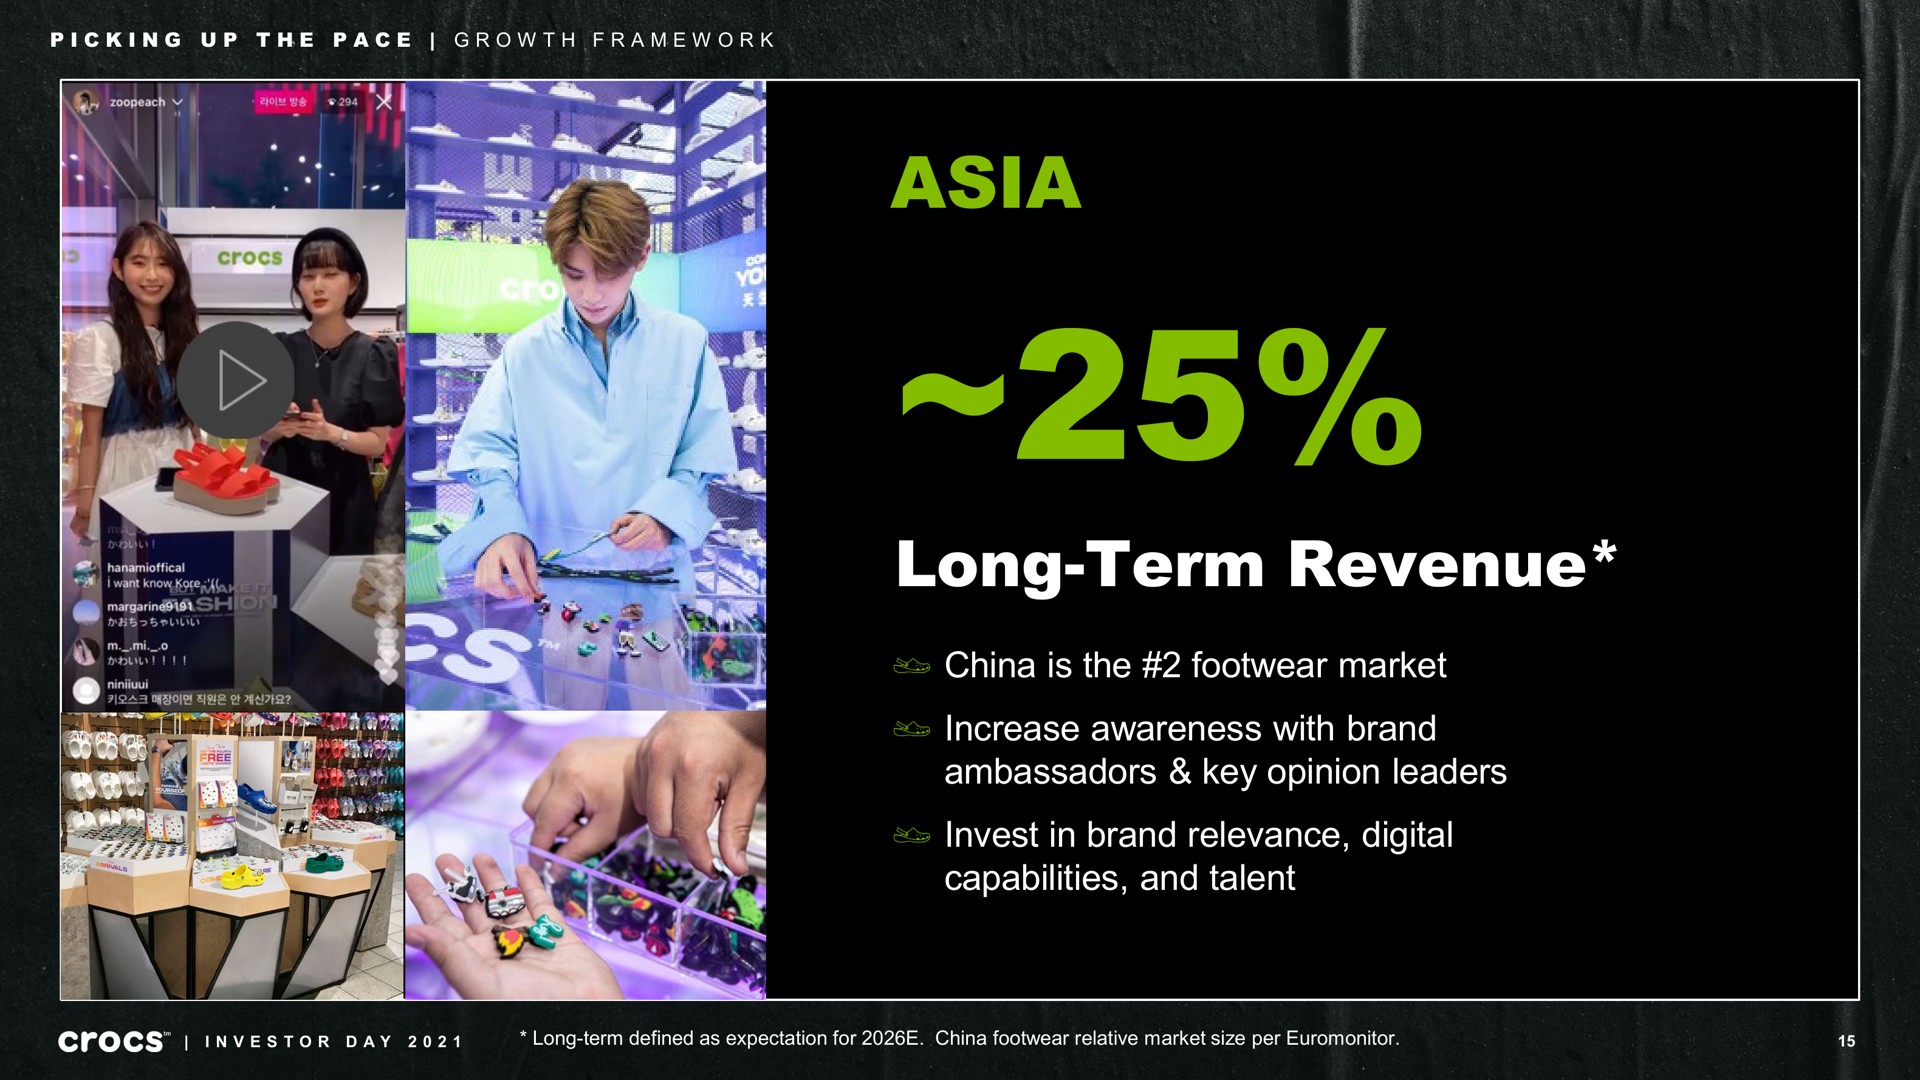 long term revenue china is the footwear market increase awareness with brand ambassadors key opinion leaders invest in brand relevance digital capabilities and talent picking up pace growth framework investor day | Crocs